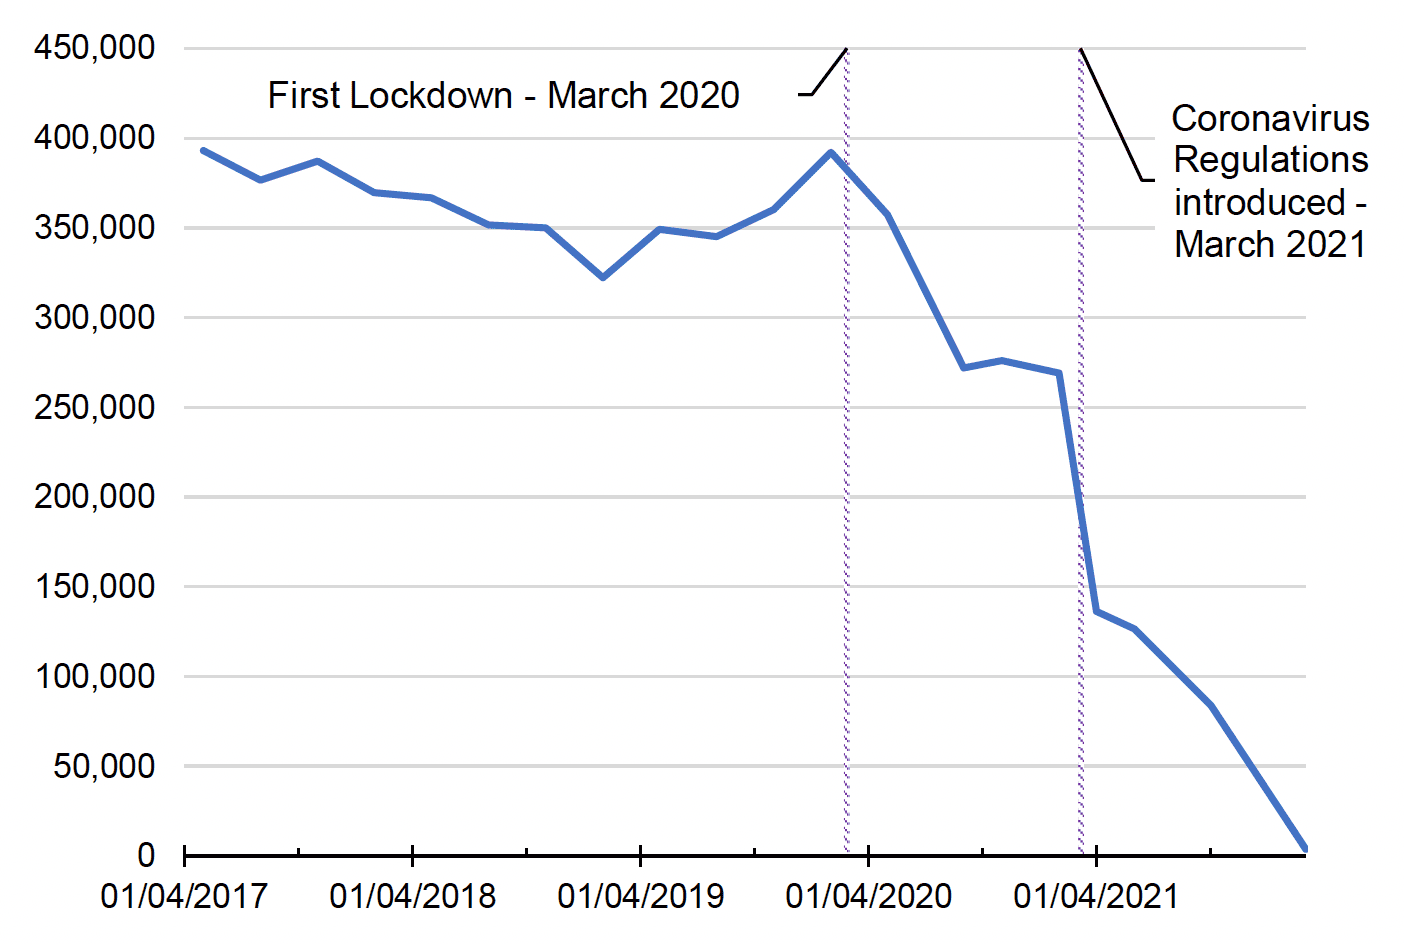 A line graph from 01 April 2017 to 31 March 2022. The line is reasonable stable between 300,000 and 400,000 hours until 01 April 2020 but the decreases sharply to zero